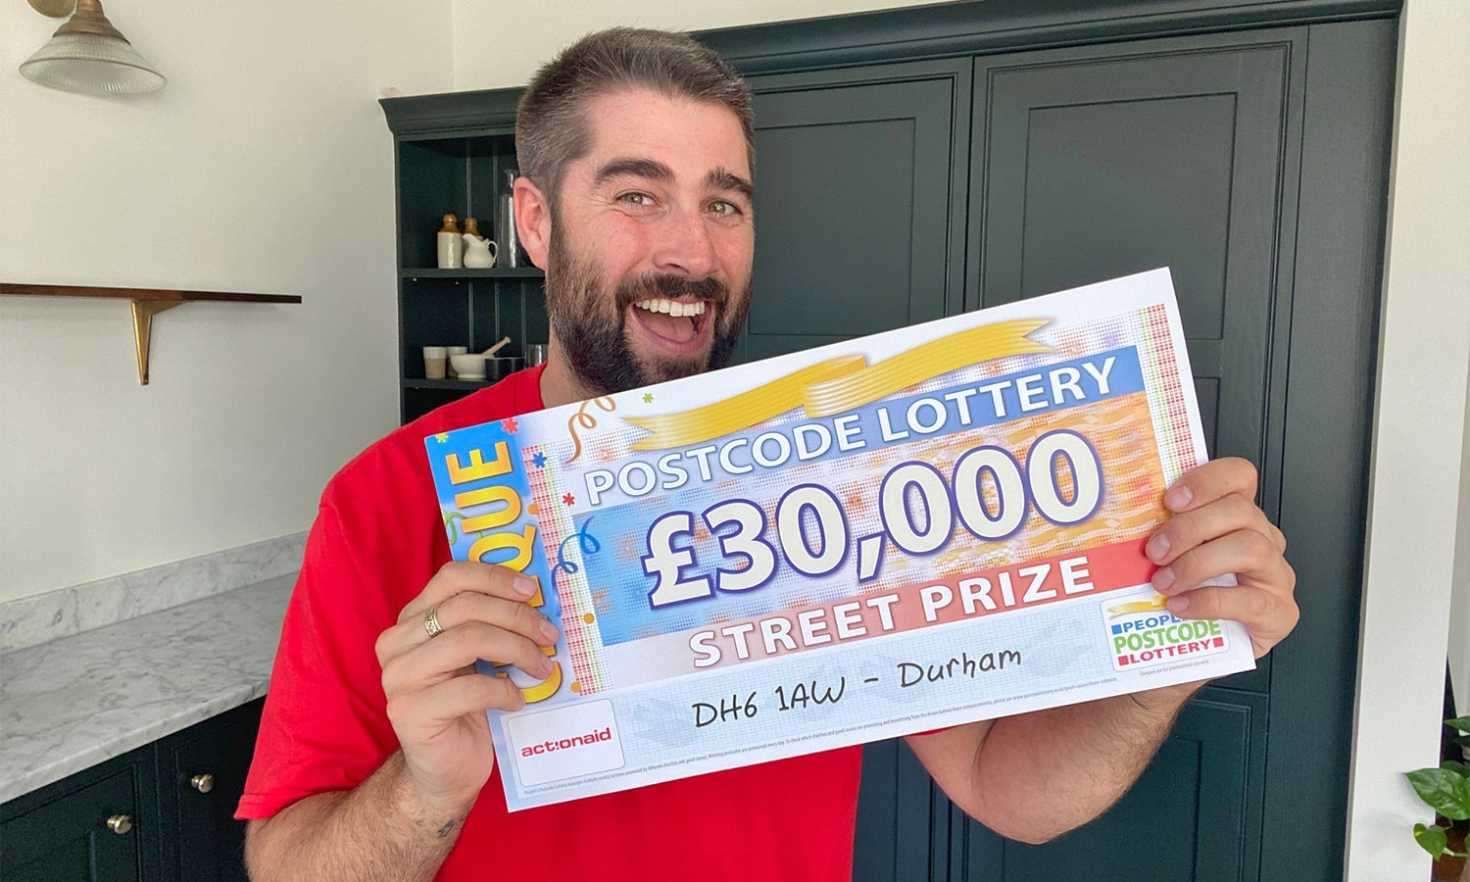 Today's £30,000 Street Prizes are heading to two lucky neighbours in Durham